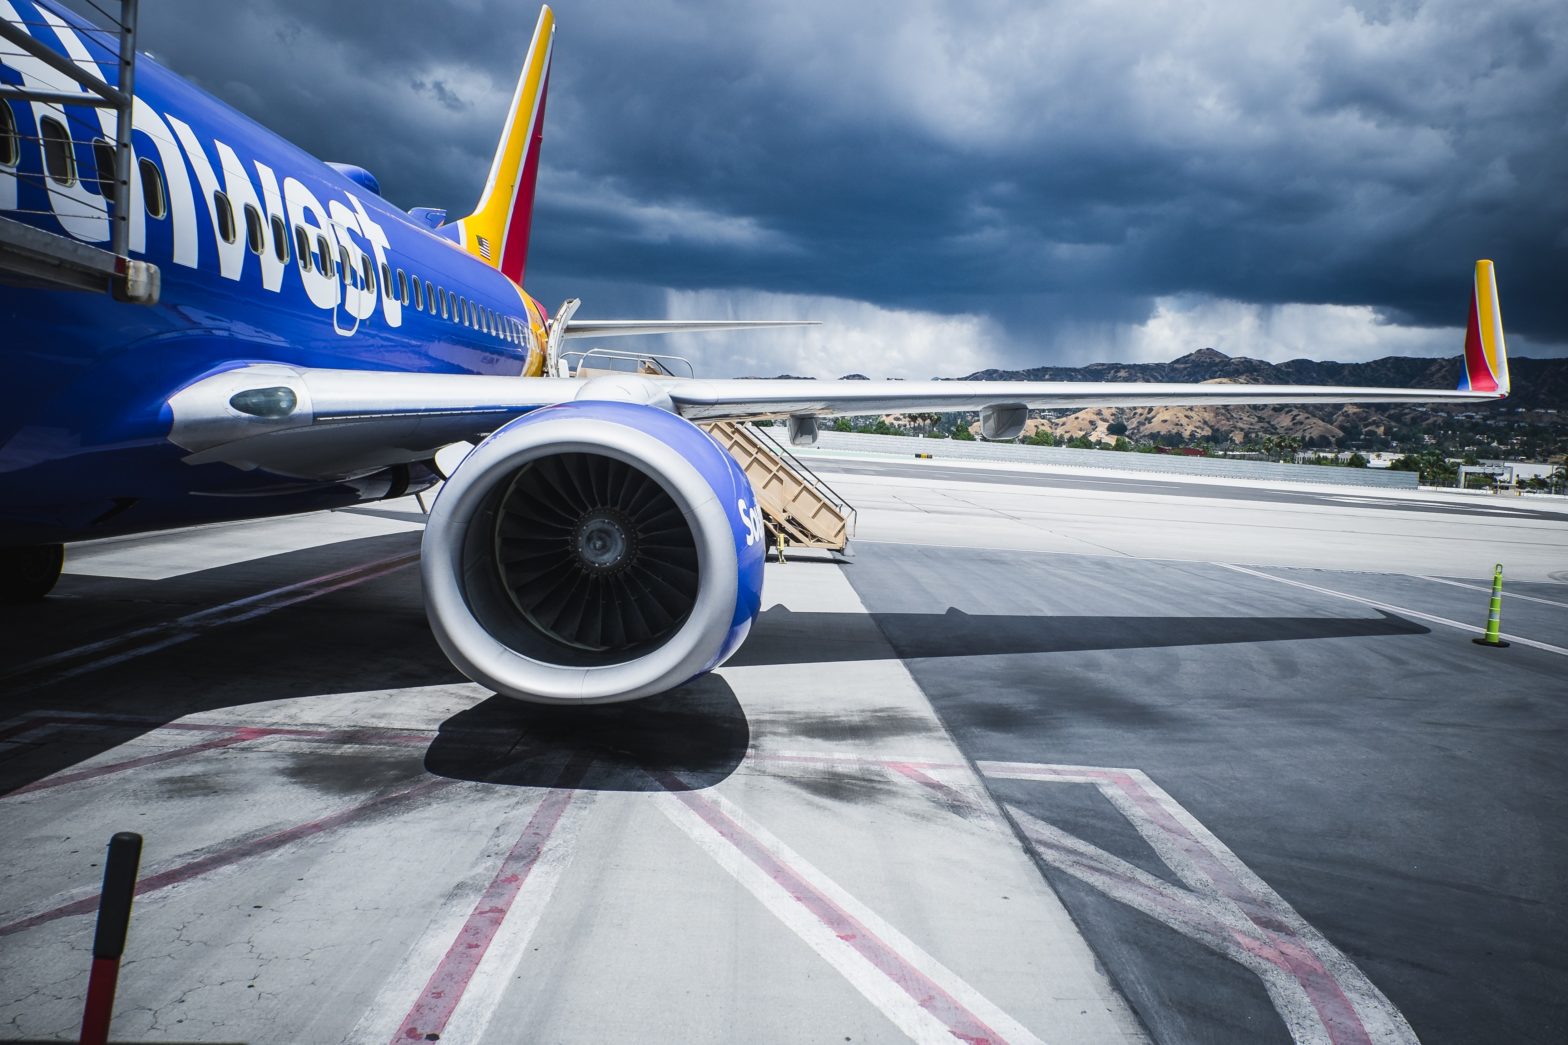 Southwest Airlines Is Offering Low Fares For Fall Travel-Here's How To Get In On The Sales